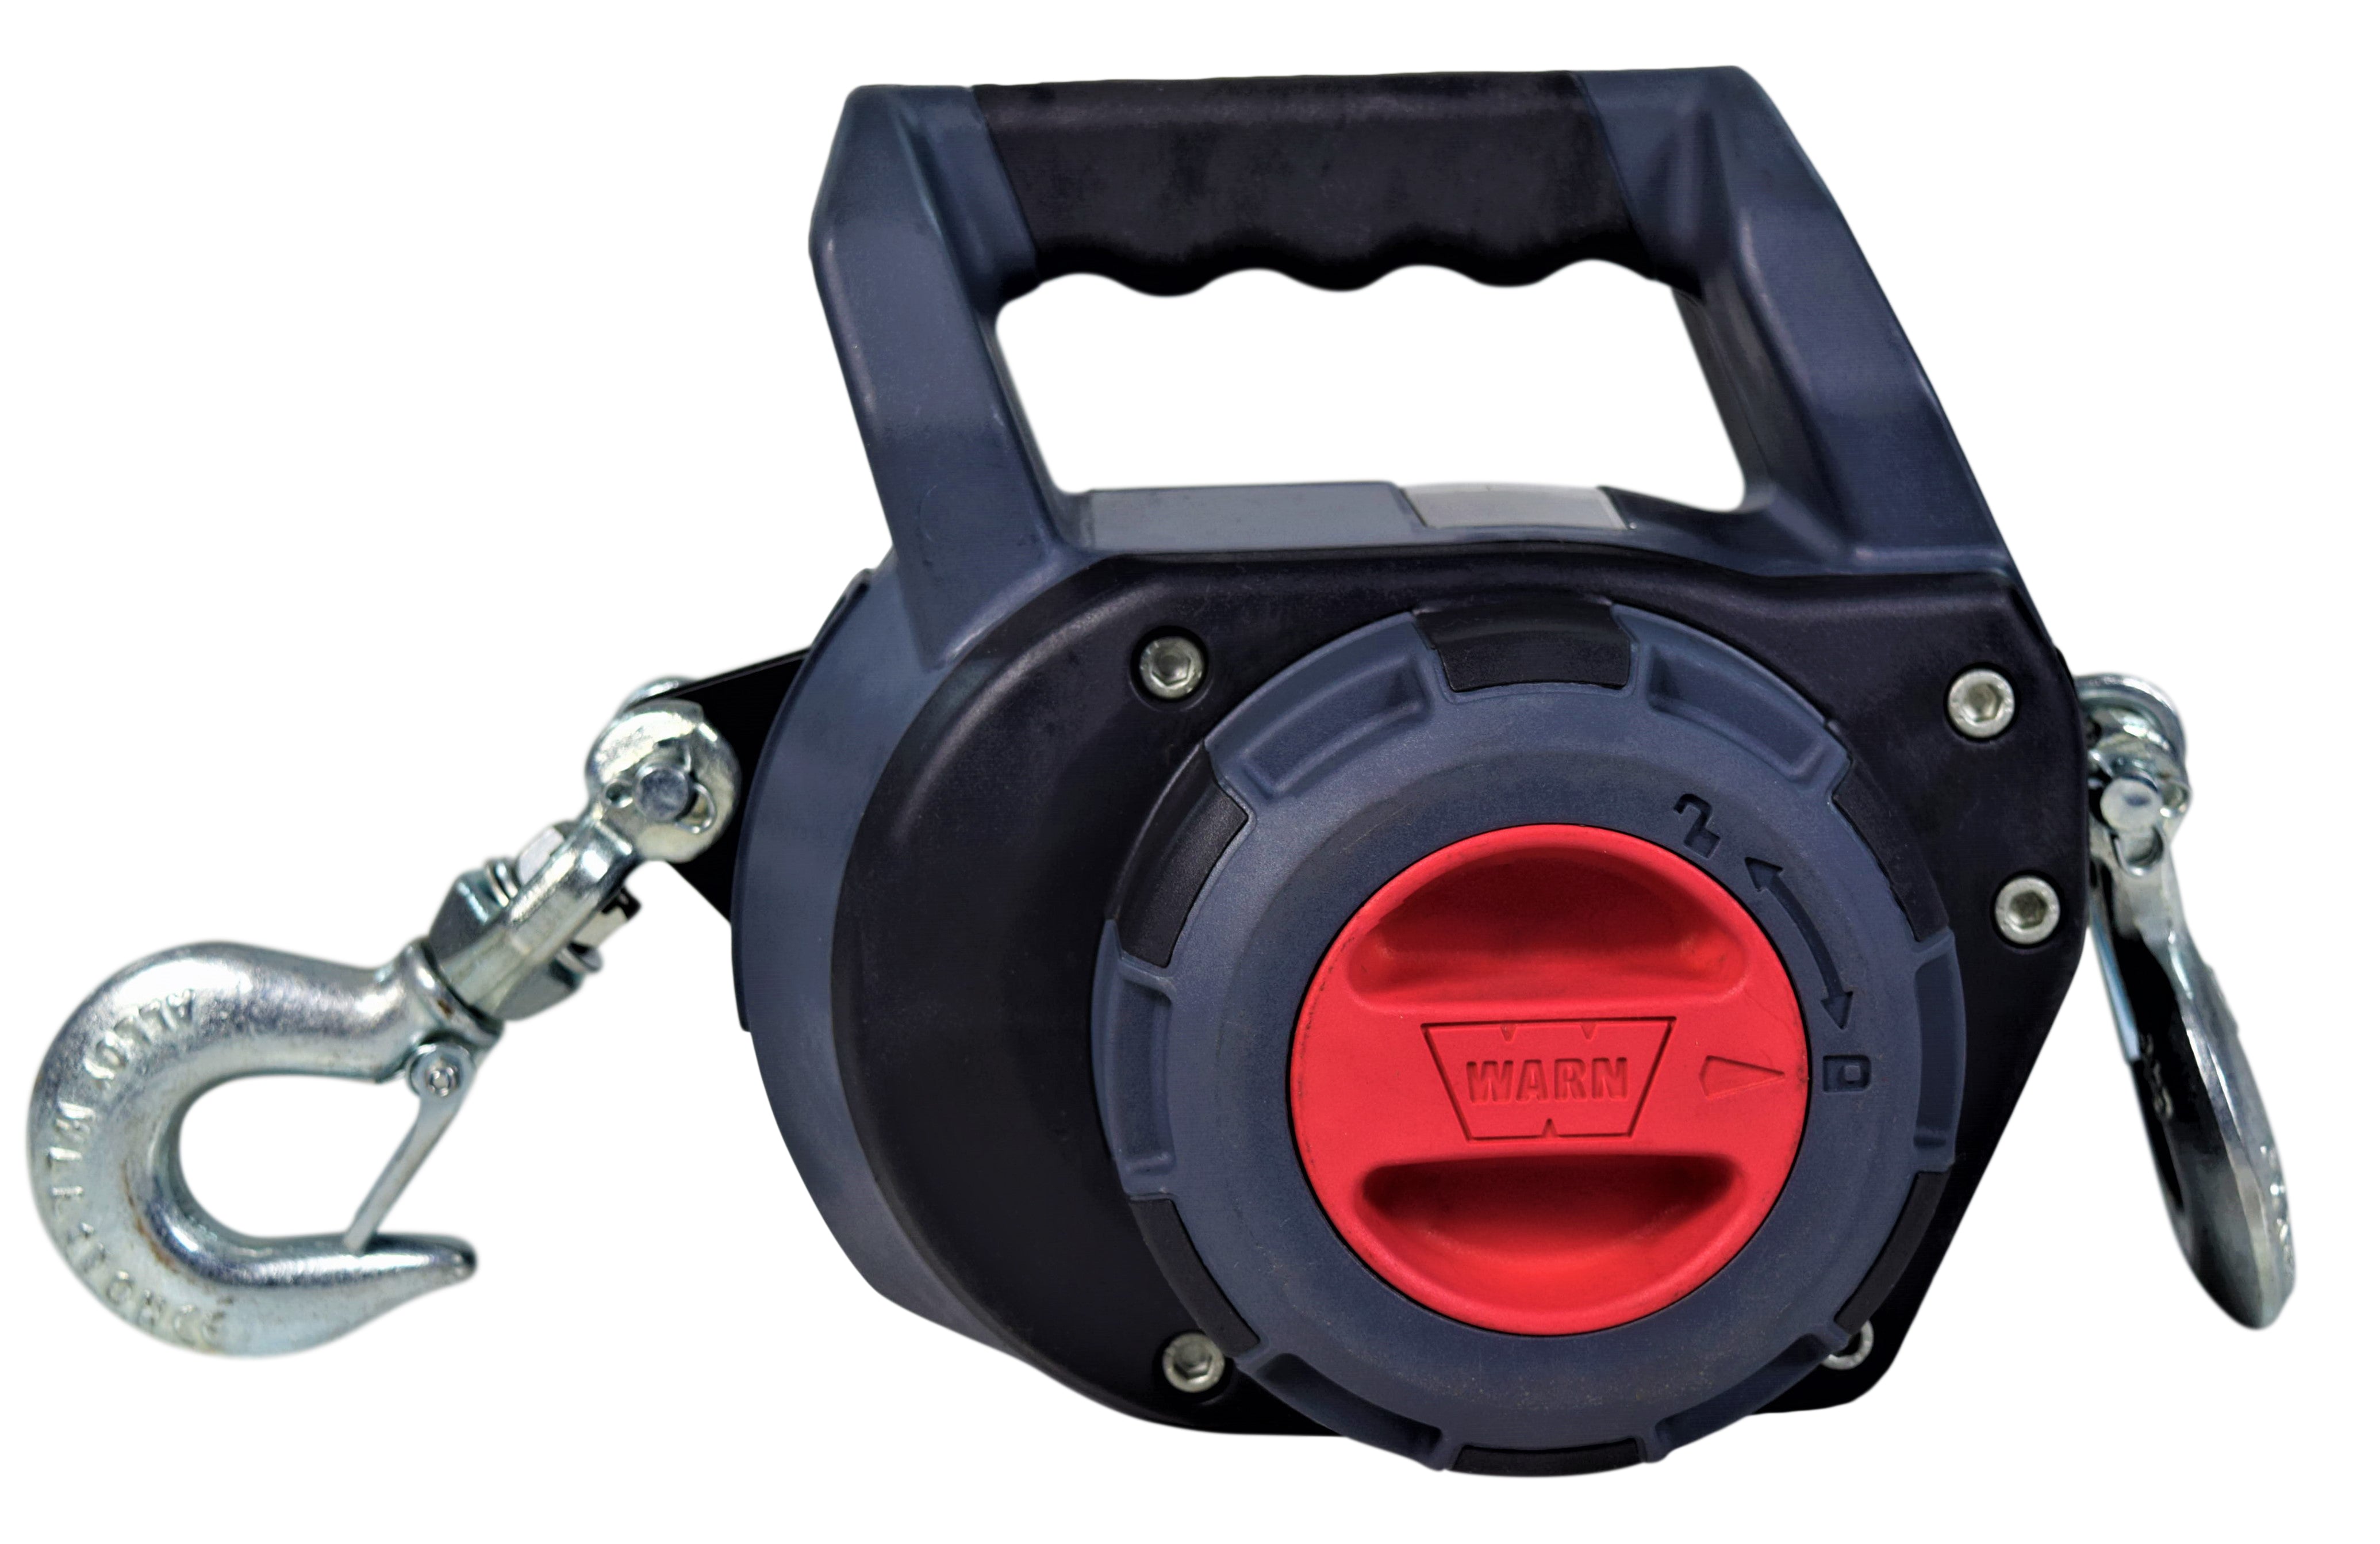 Warn-101570-Drill-Winch-750-lbs-Capacity-40-Synthetic-Rope-Free-spool-Clutch-image-3